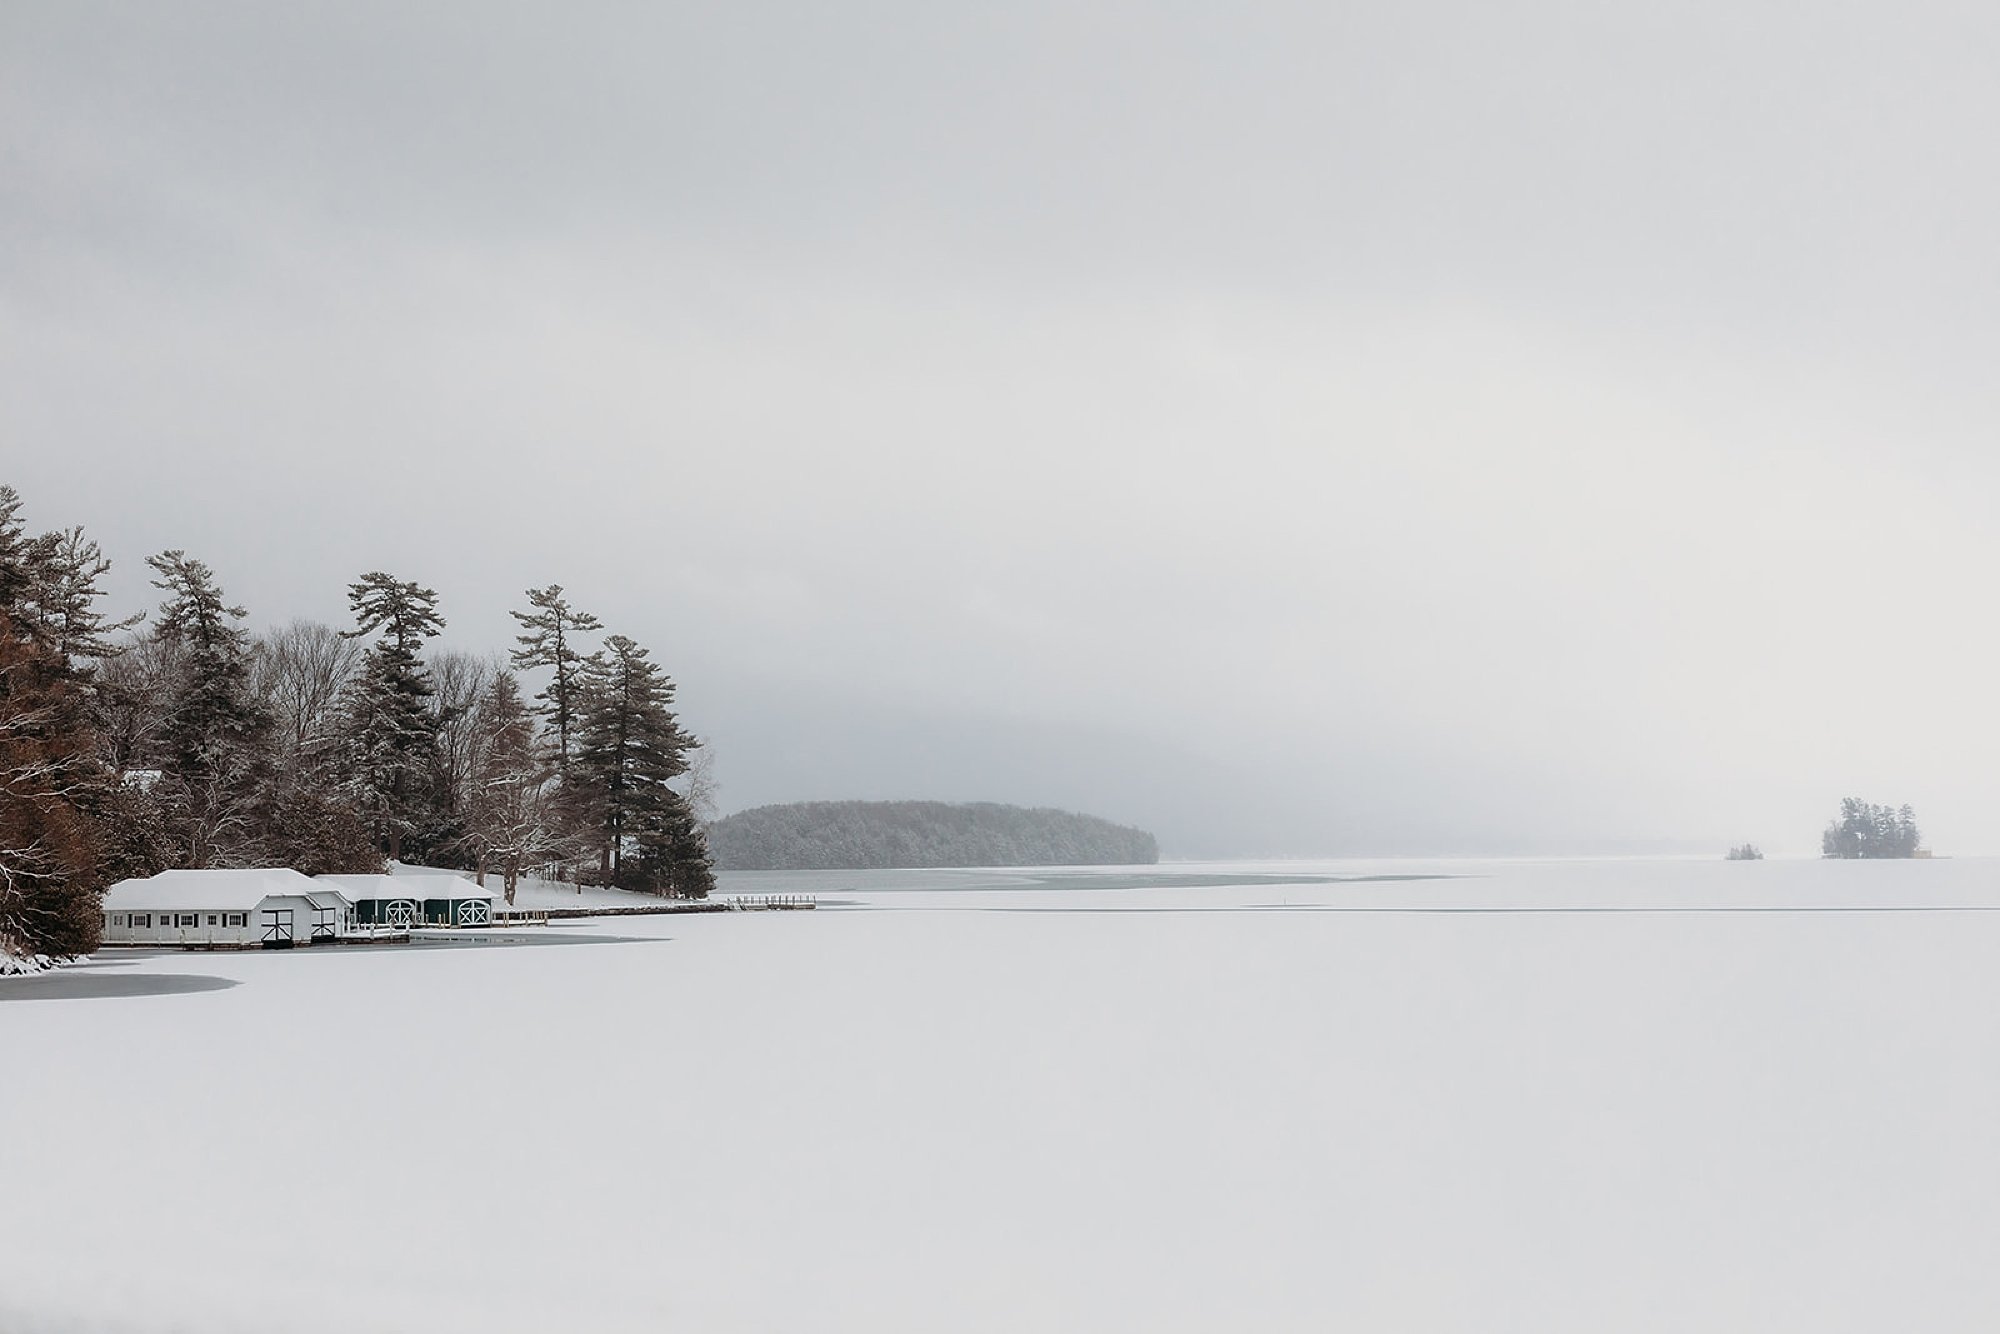 snowy day on Lake George in New York